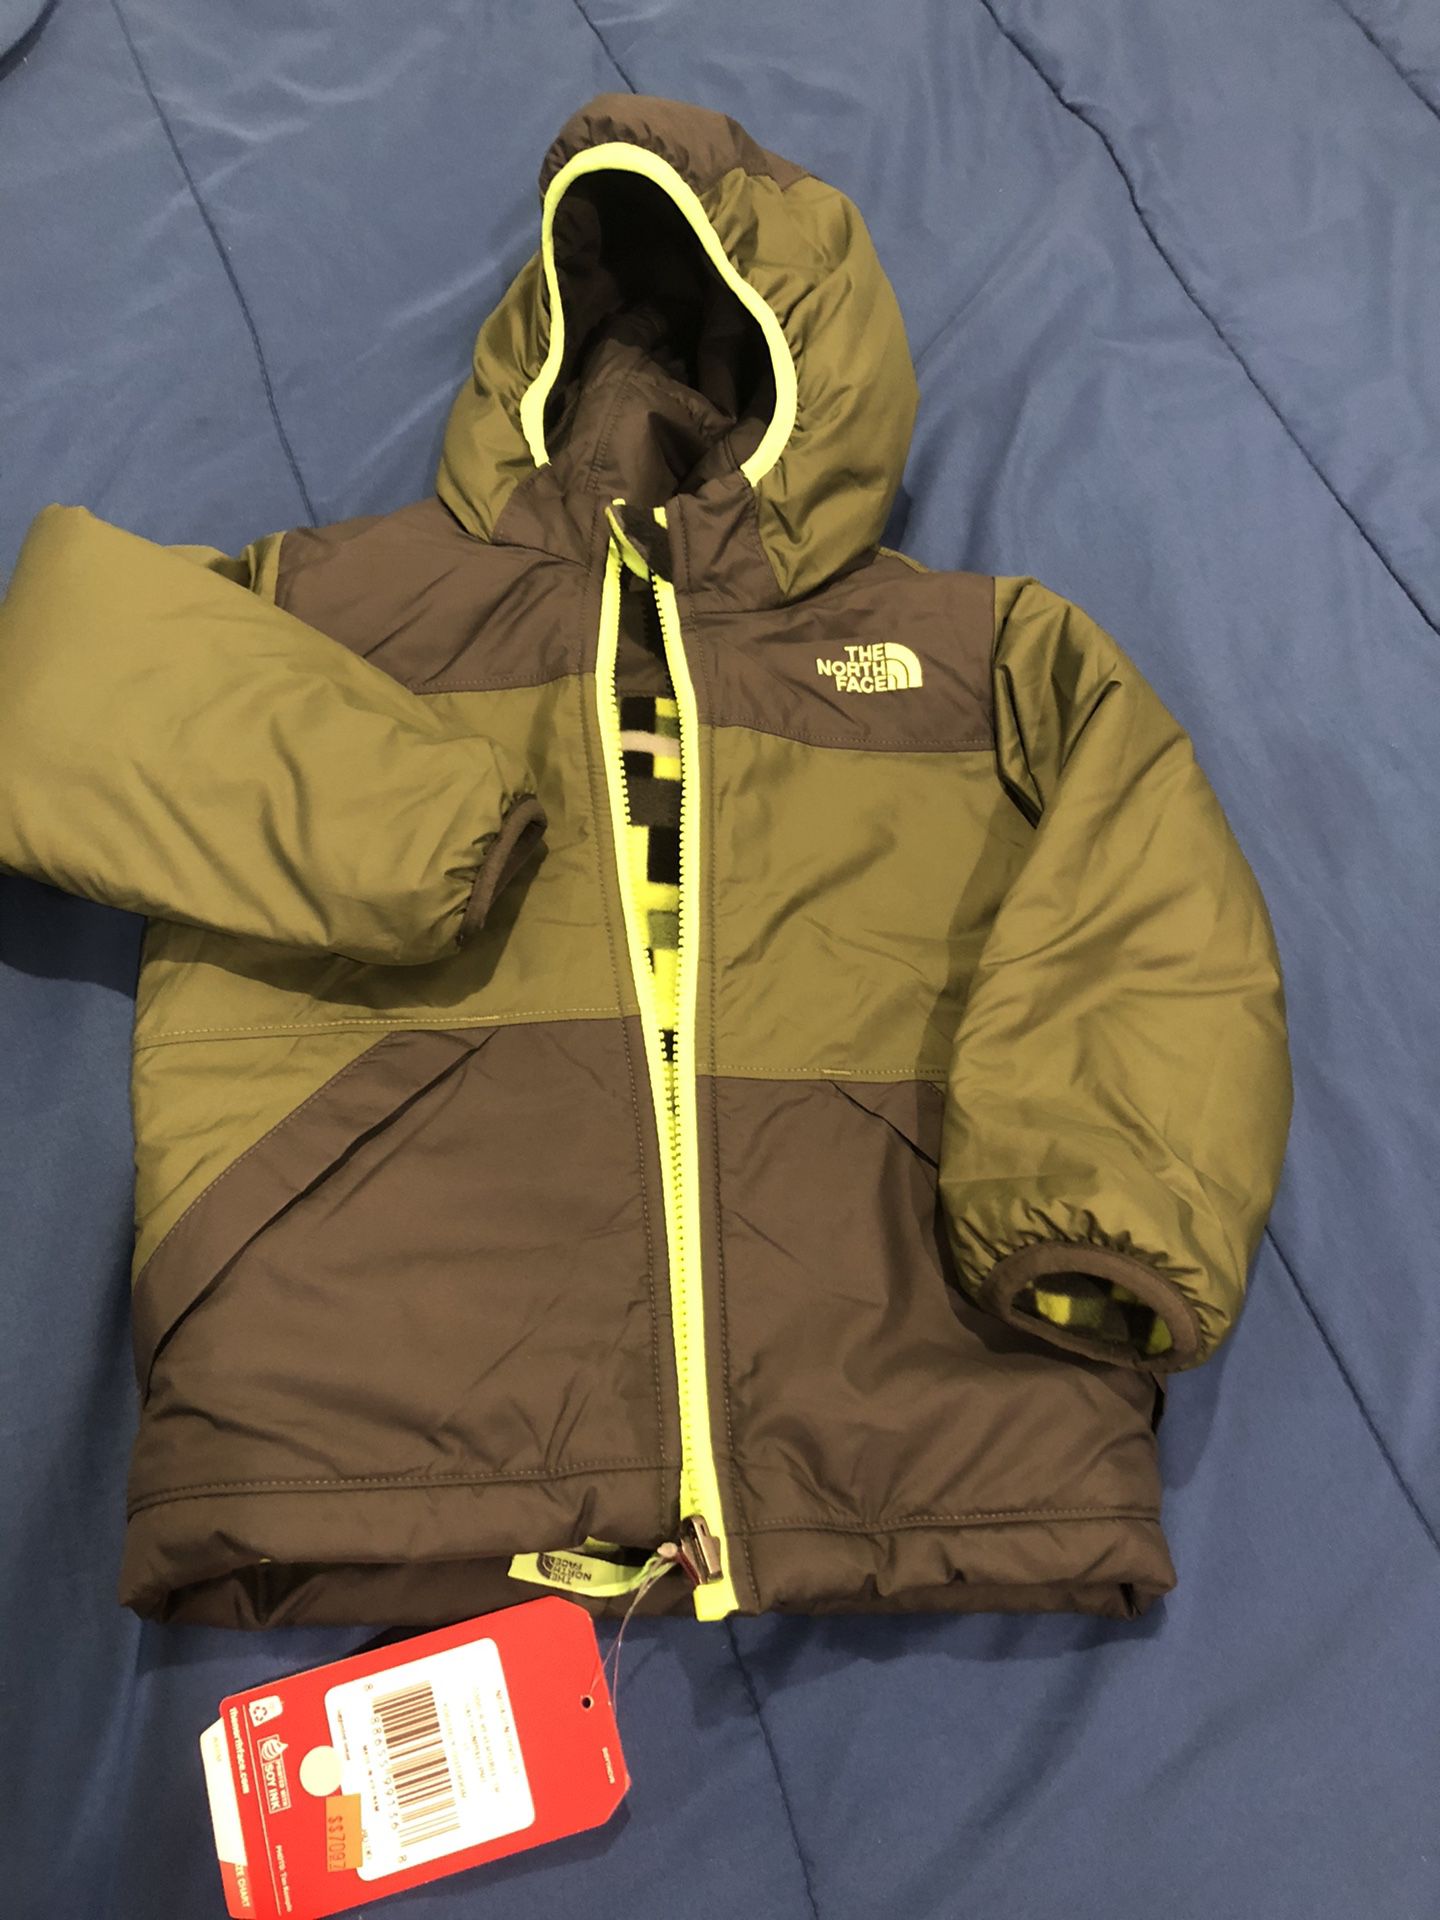 North Face Reversible Jacket